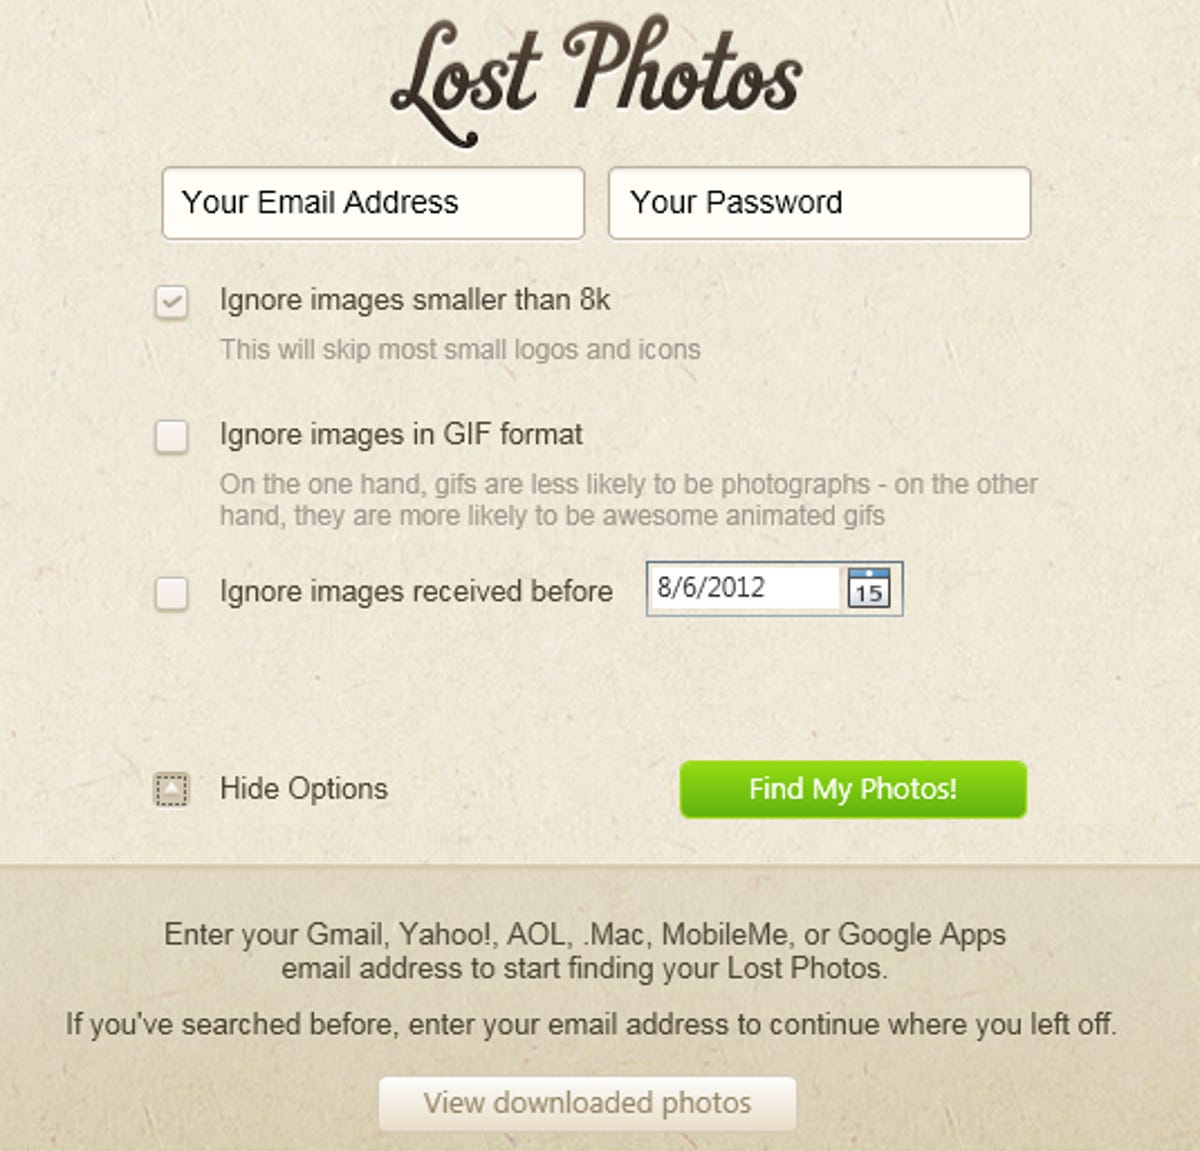 Step 2: Set options for Lost Photos.